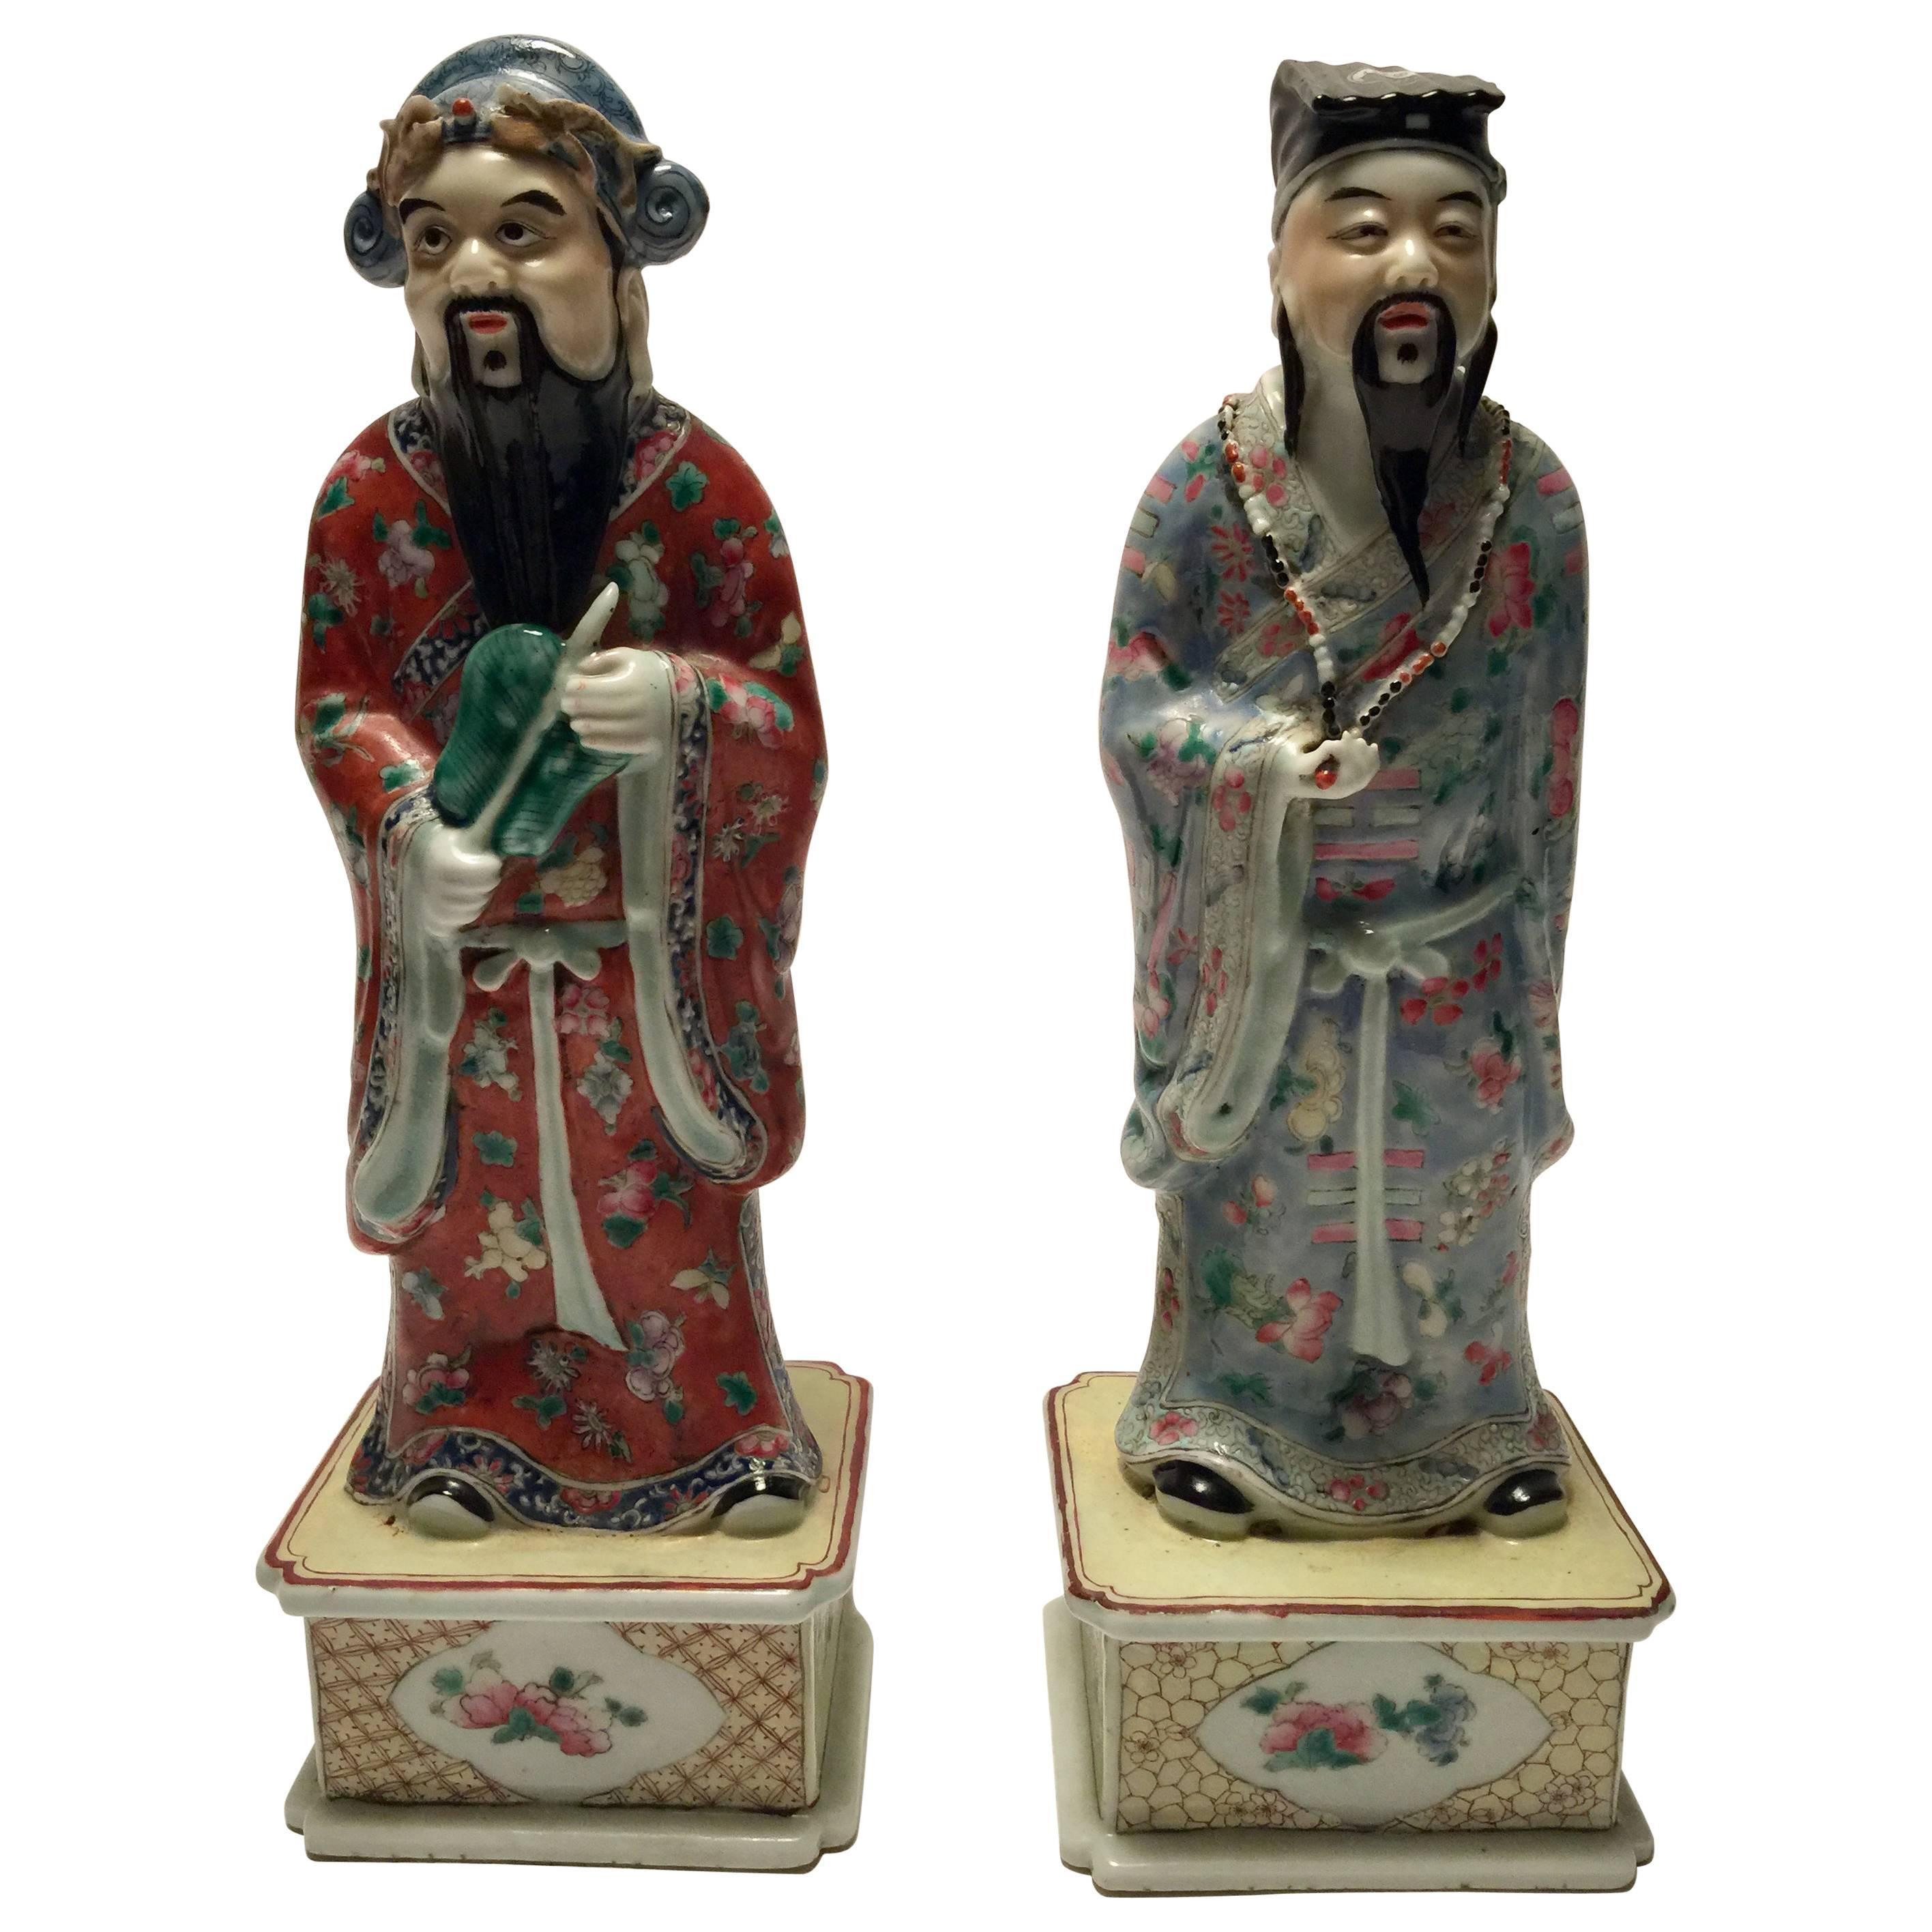 Pair of Porcelain Chinese Philosopher Statues, 18th Century